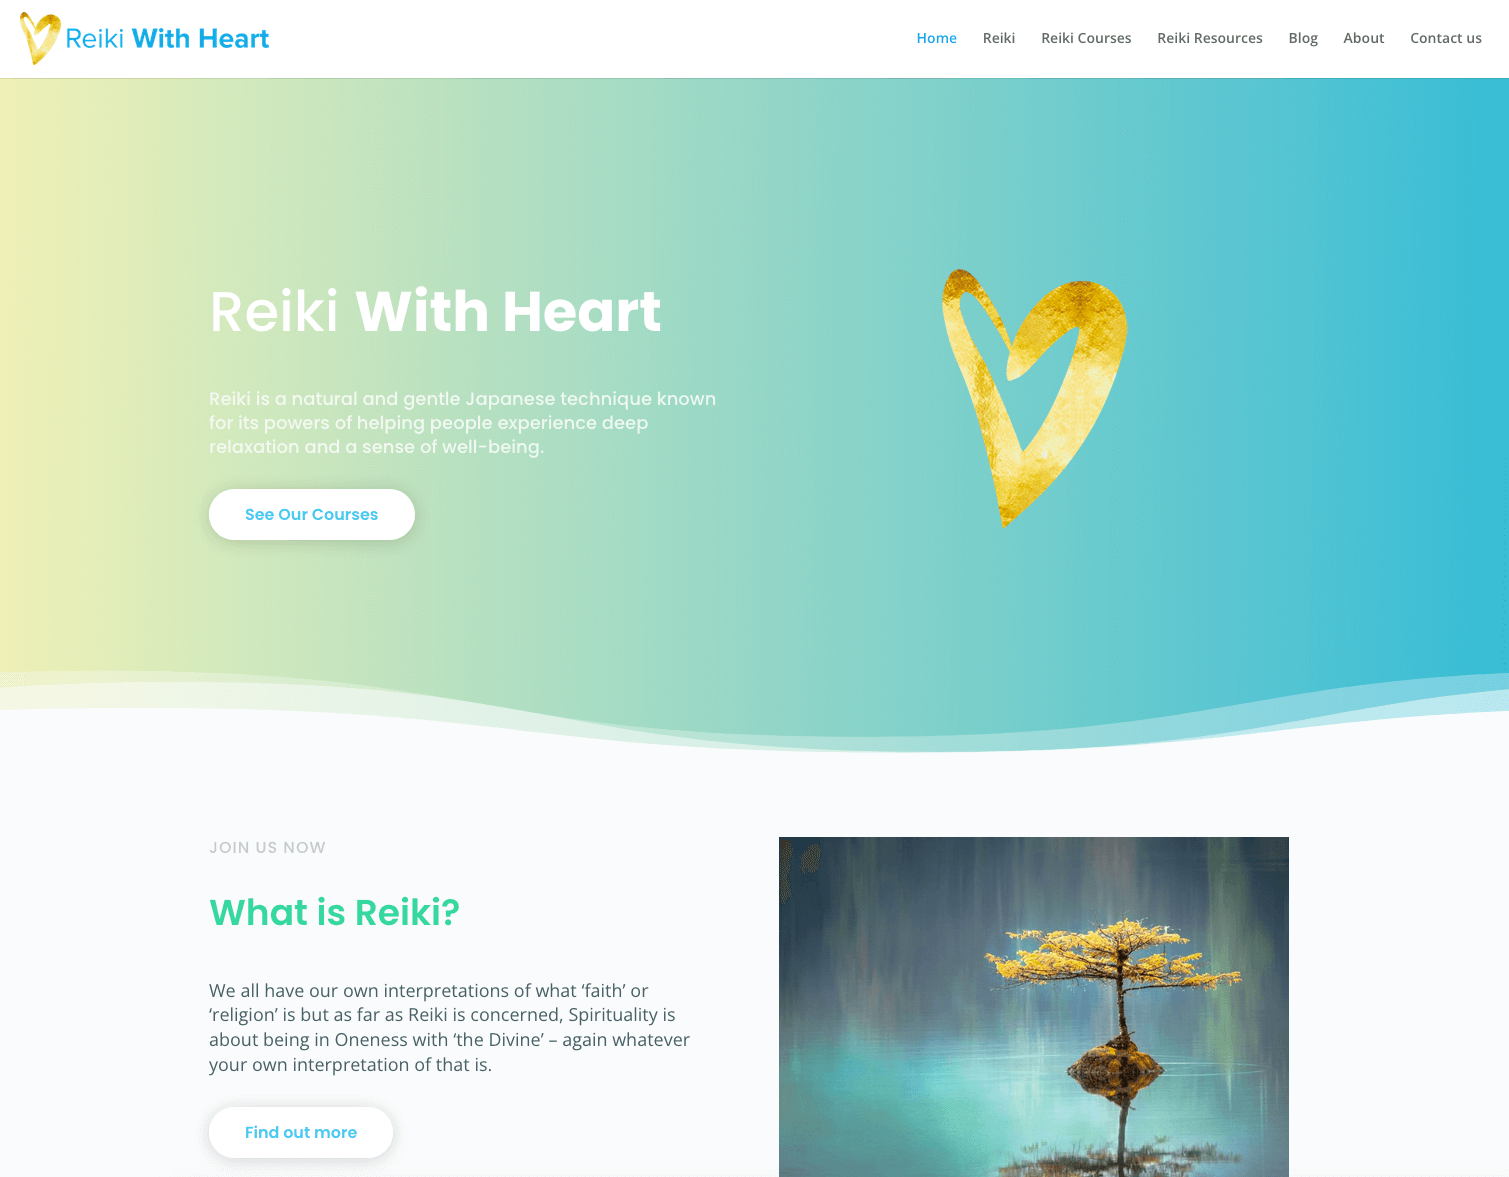 ReikiWithHeart Home Page